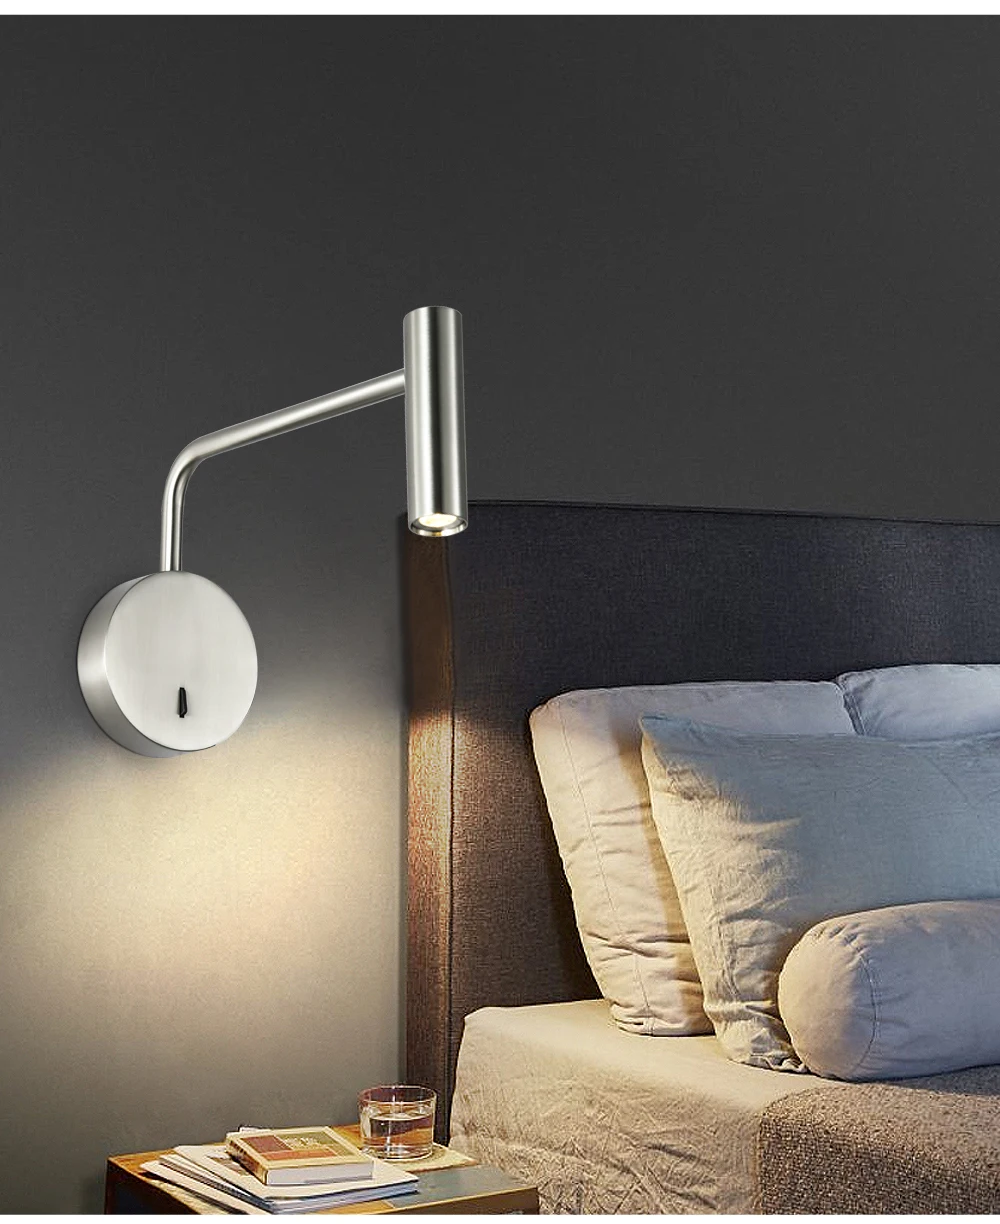 US $31.17 Zerouno Led Wall Light Wall Lamp Arm Swivel Home Modern Decor Bedroom Switch Led 3w Reading Light Bedside Indoor Home Interior